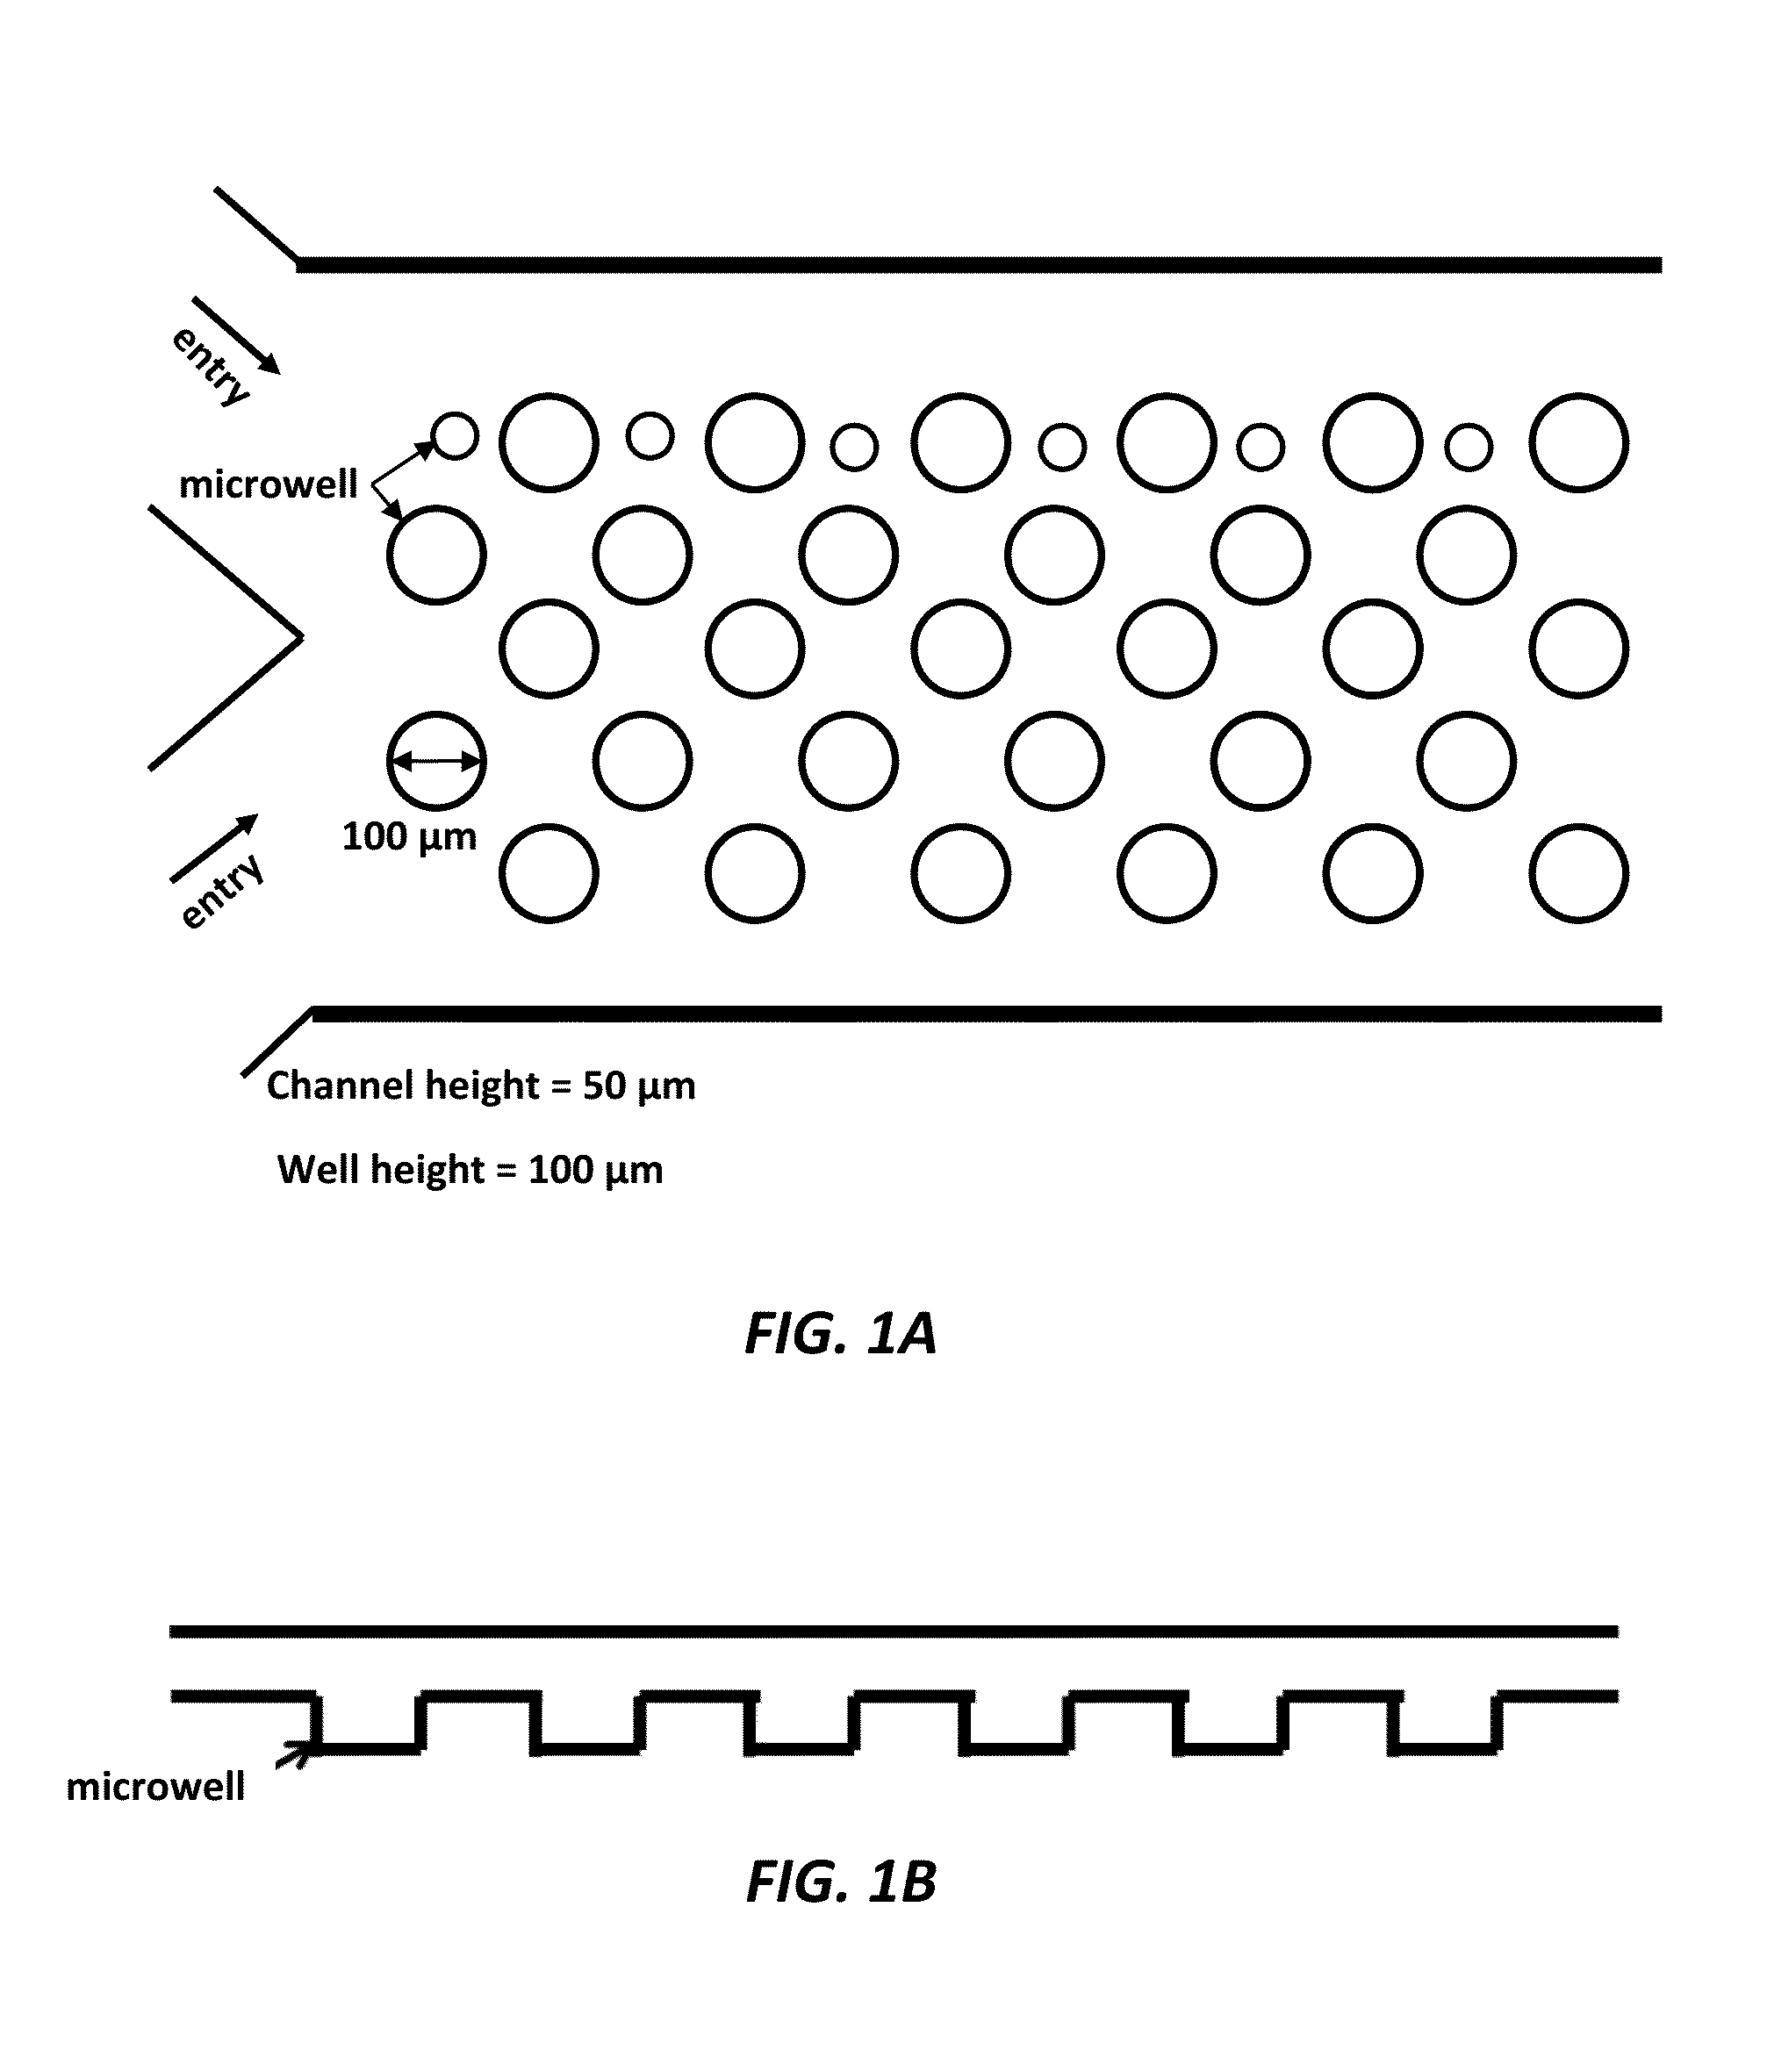 Microdroplet Formation by Wells in a Microfluidic Device